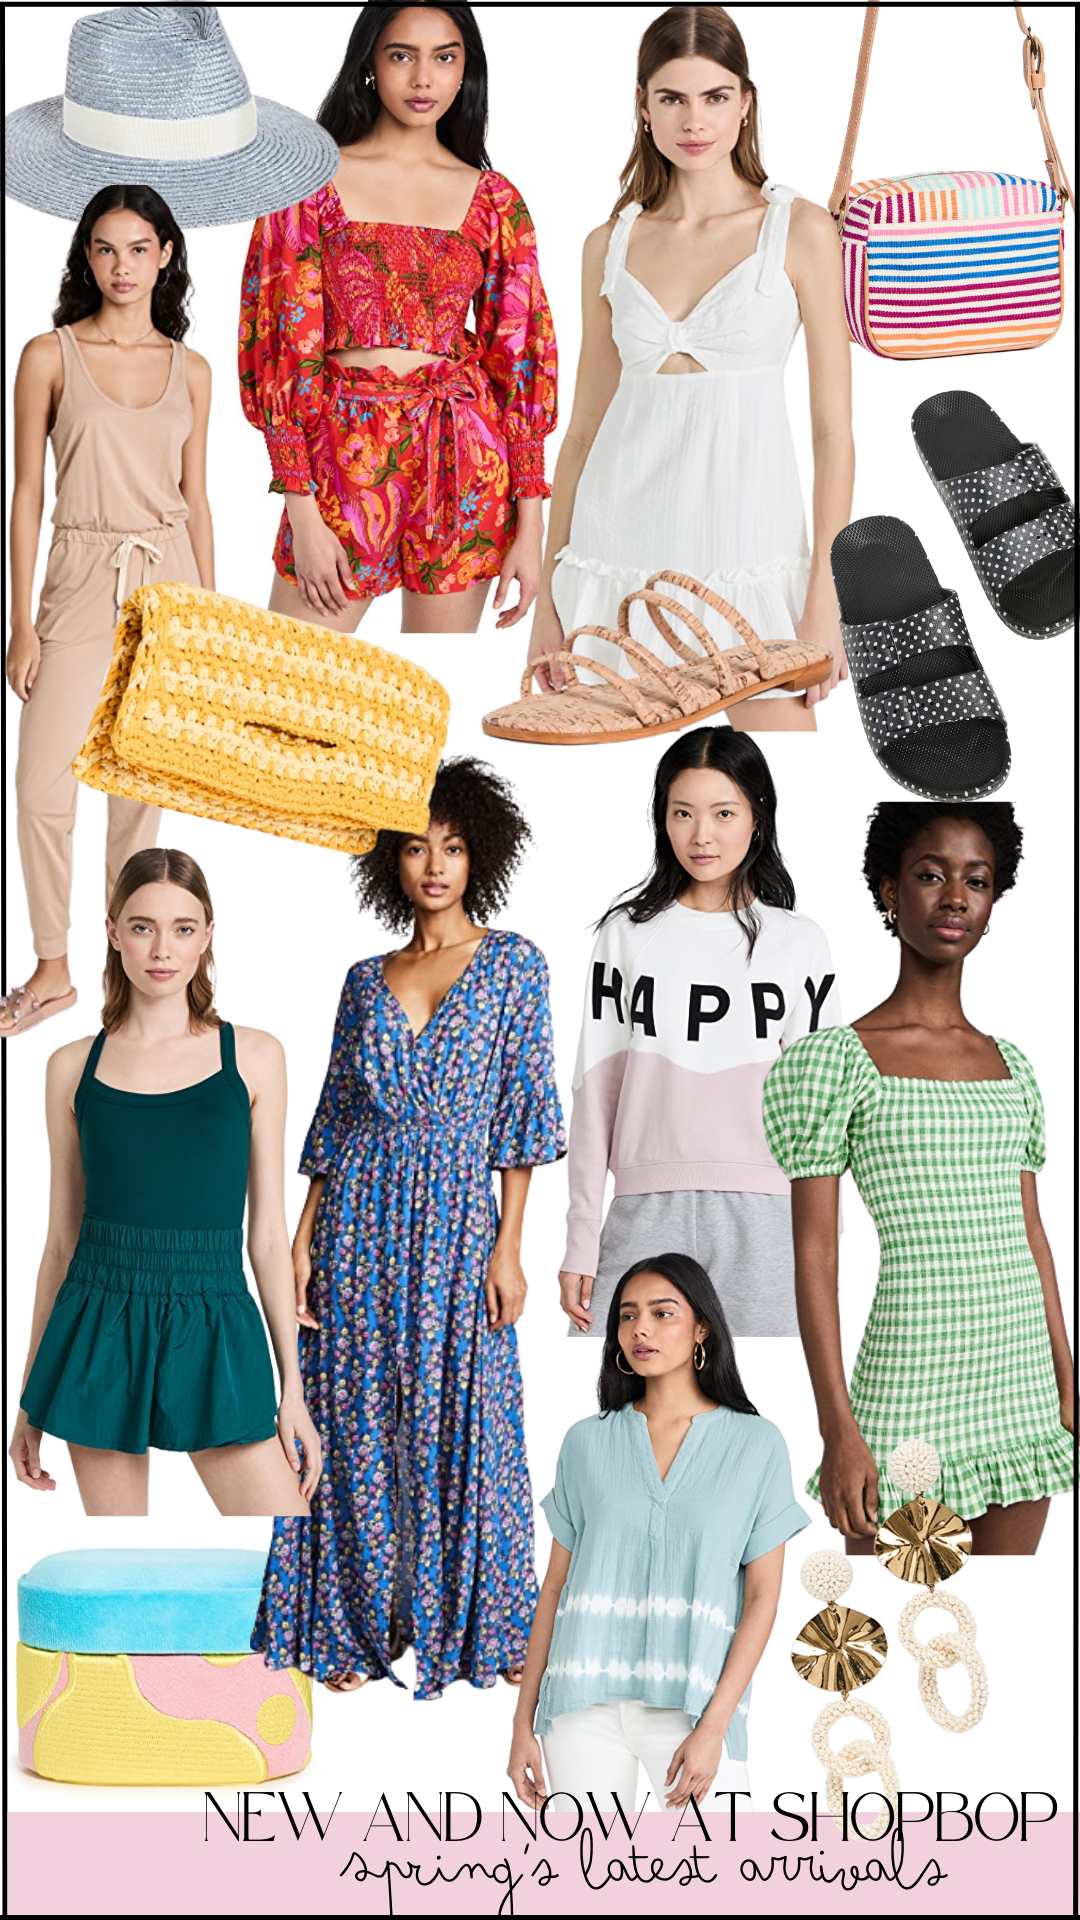 shopbop new arrivals for spring featured by top Nashville fashion blogger, Hello Happiness.